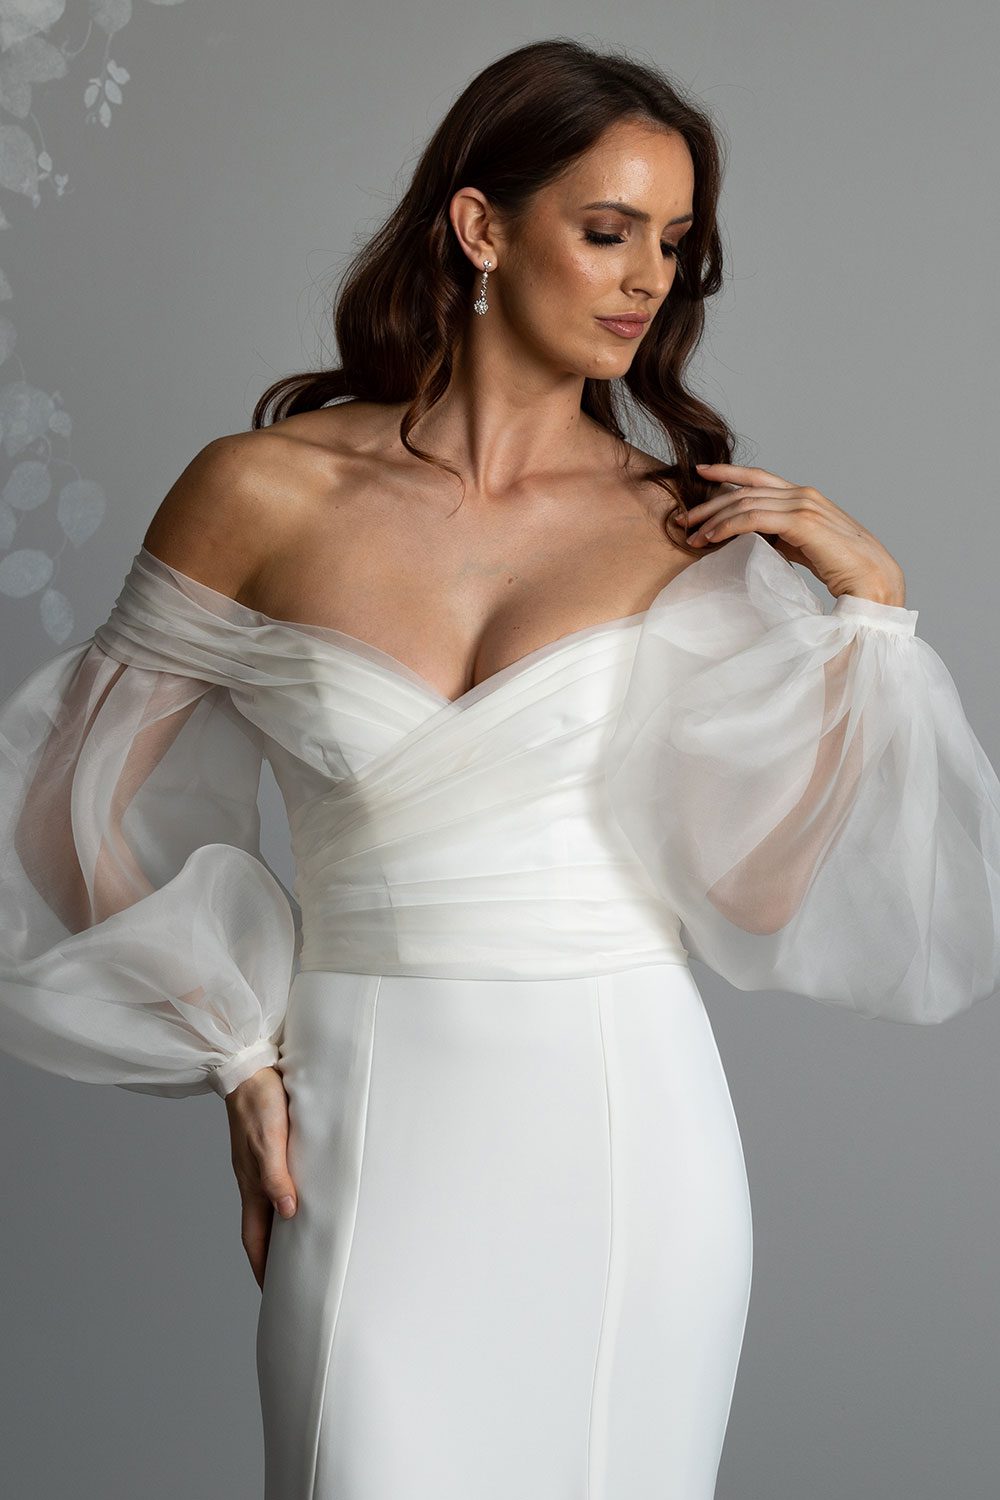 Marilyn Wedding Dress by Vinka Design - . Featuring a sculptured, fitted bodice with a sweetheart neckline that flows seamlessly into beautiful off shoulder detail that dips into a V-shaped back. For added drama, we have paired our Marilyn gown with detachable silk organza sleeves that taper at the wrist with delicate, self-covered silk buttons. Model with hand to shoulder and looking down wearing organza detachable statement sleeves over timeless design gown